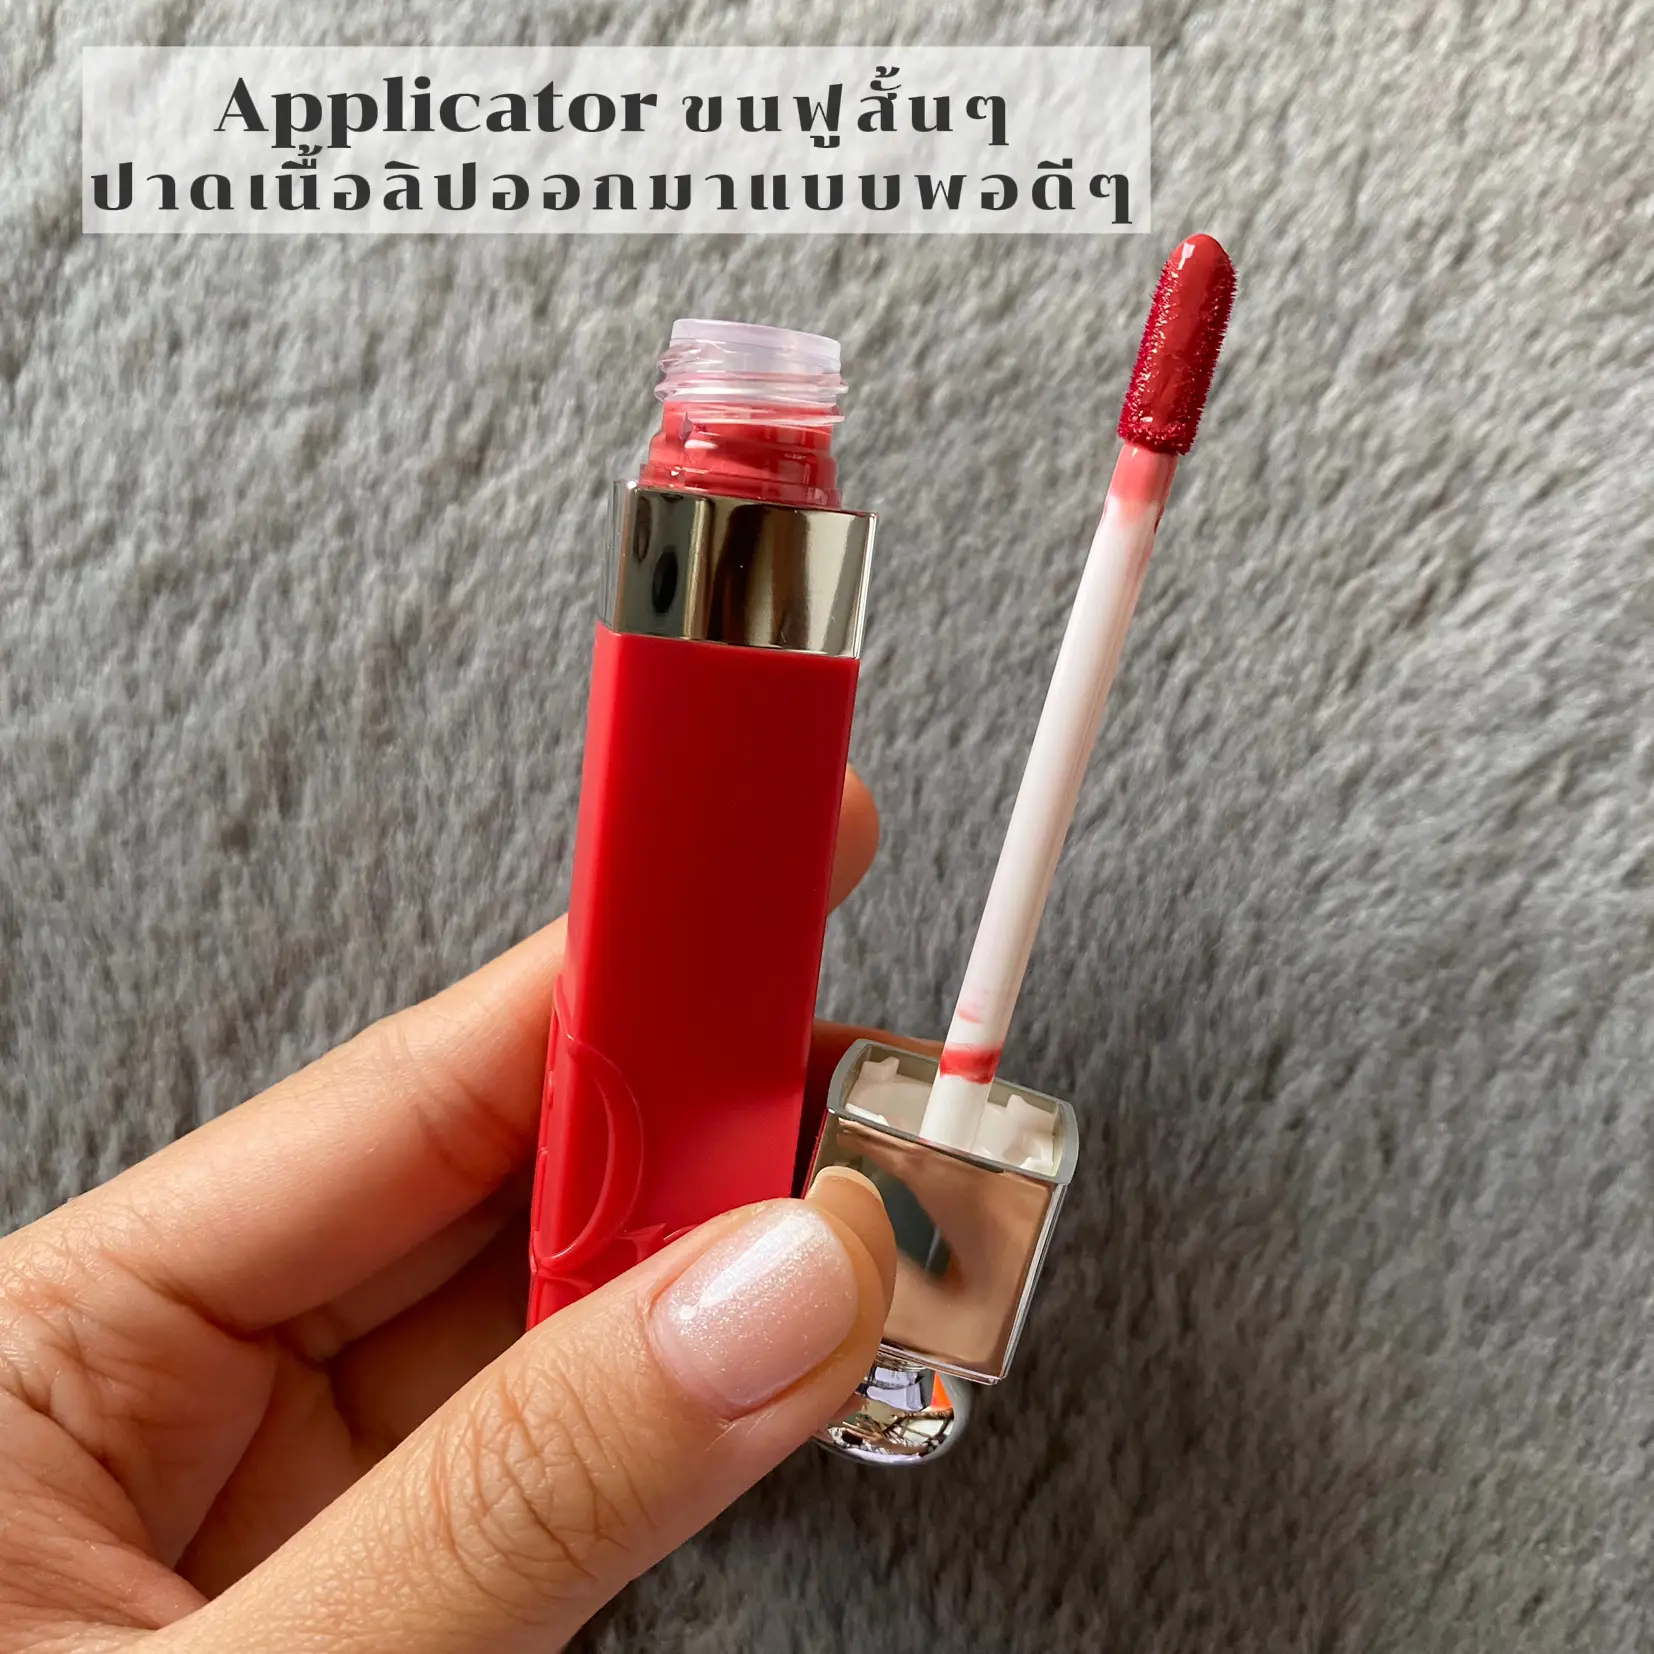 Invited to open a new Dior Addict Lip Tint bag. Bang, not bang!!, Gallery  posted by LittlecatReview